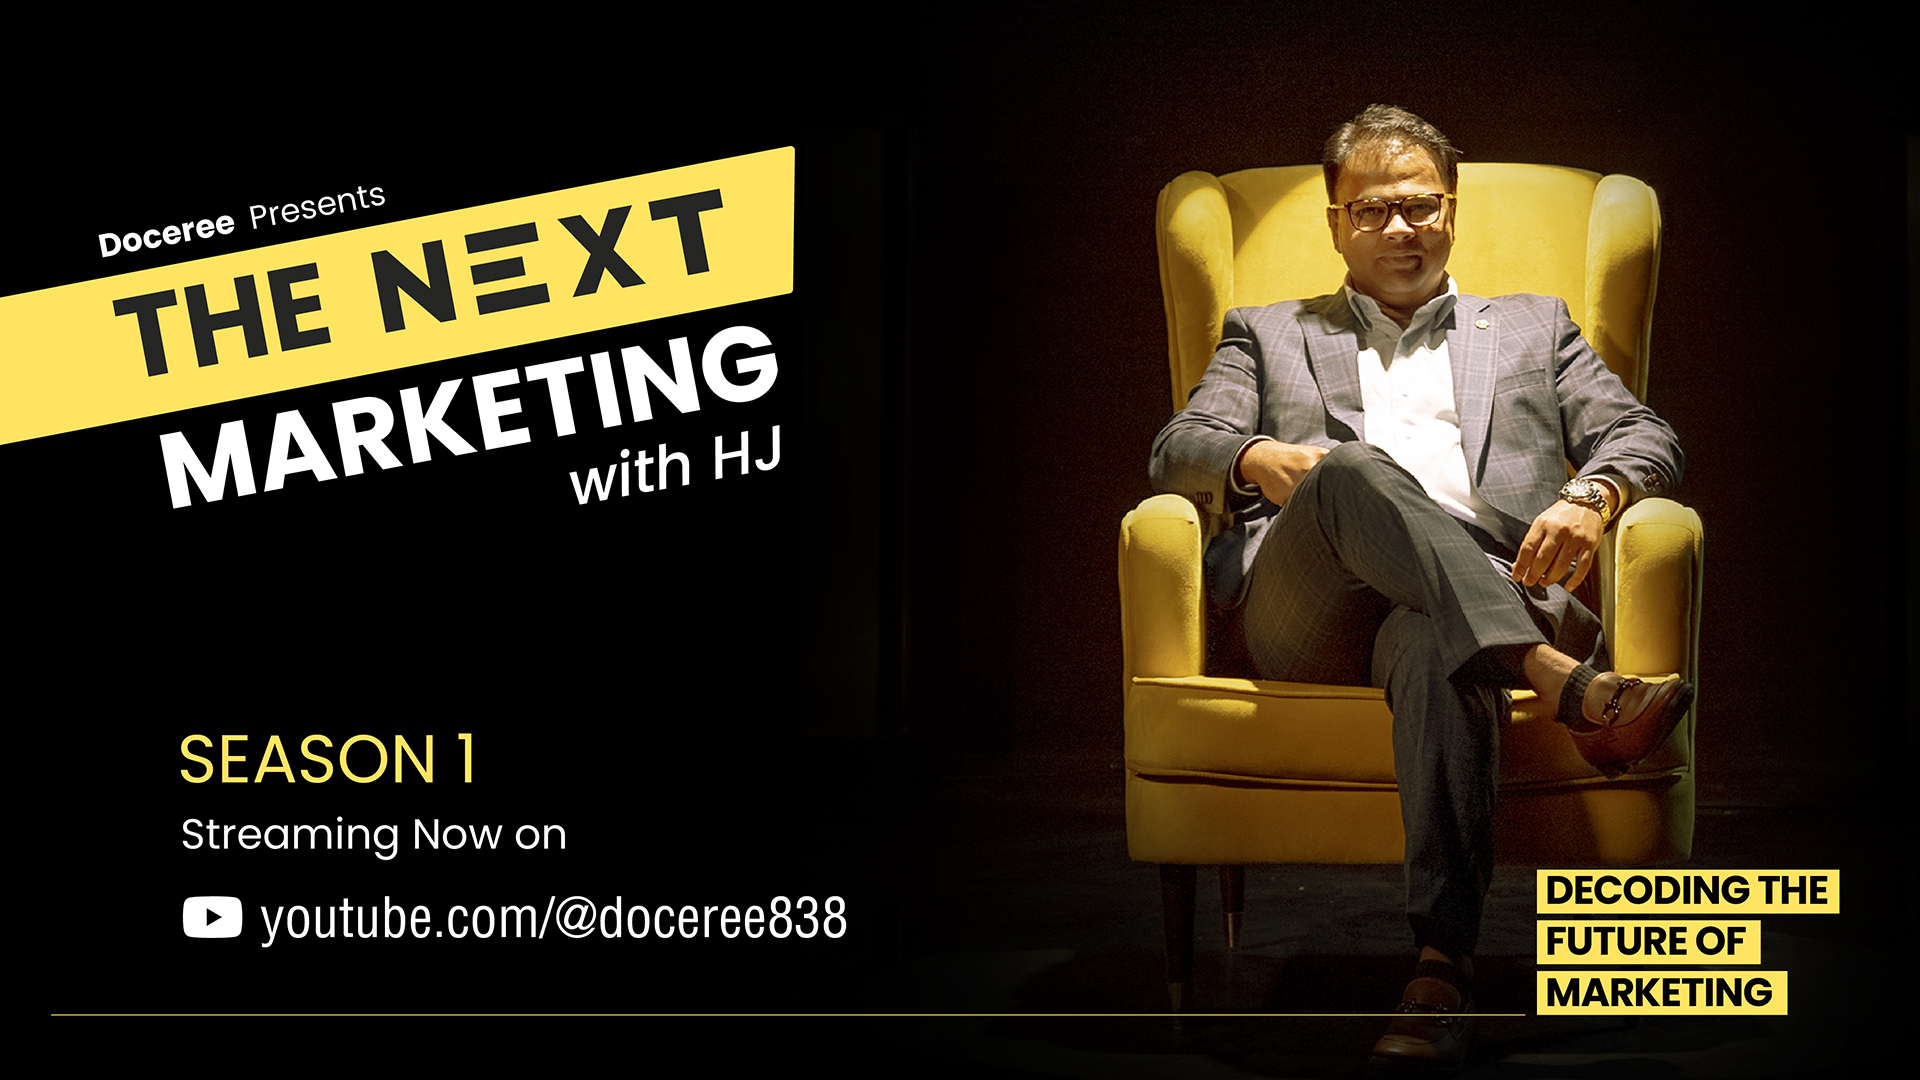 Doceree collaborates with global marketing experts in an industry-first talk show ‘The Next Marketing with HJ’